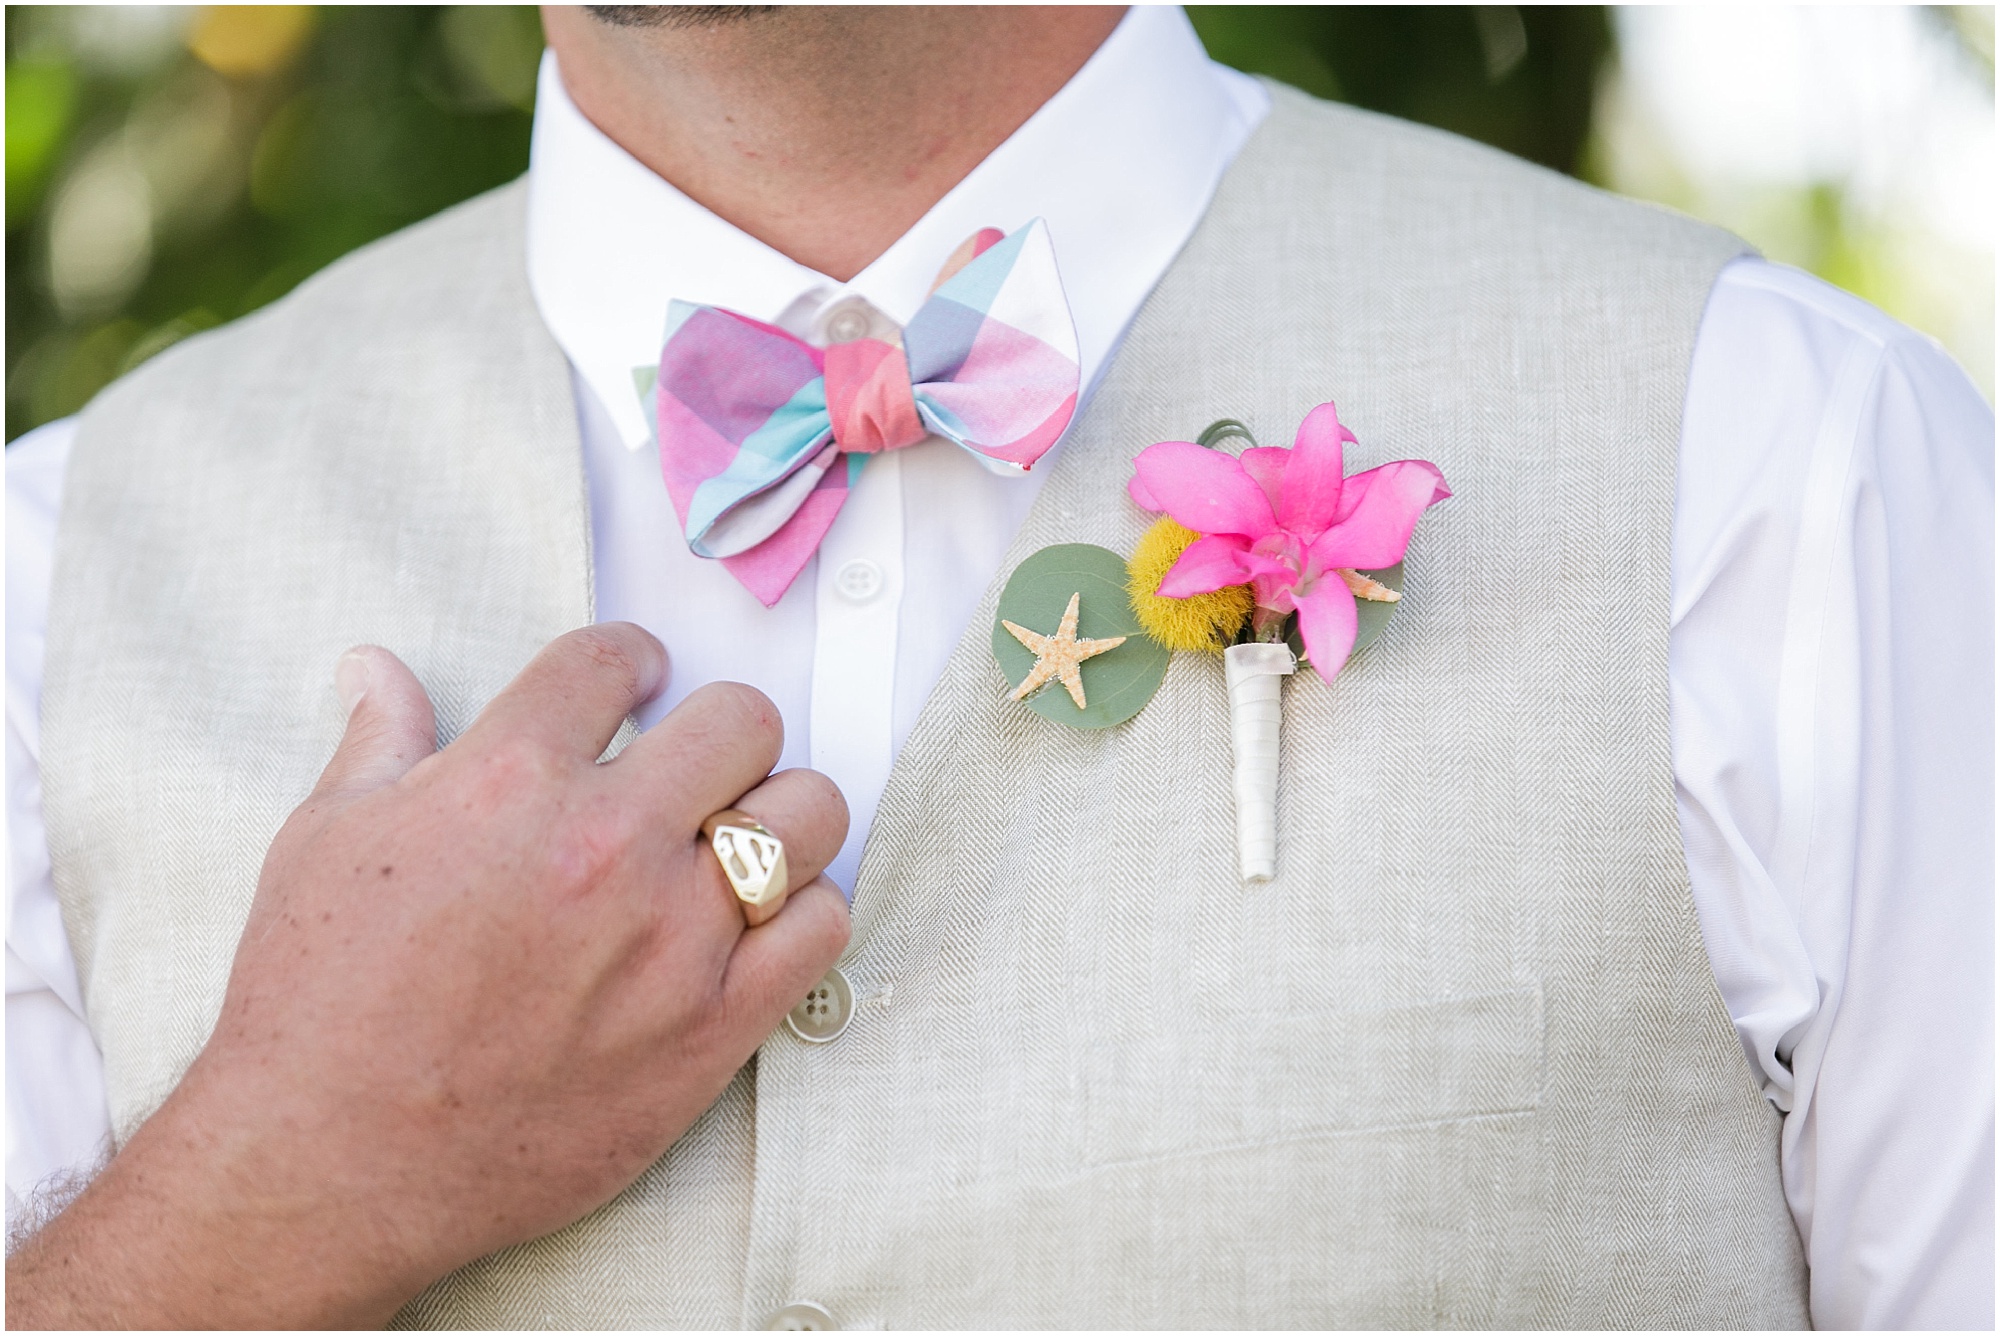 Grooms accessories including pink plaid bowtie, pink and yellow boutonnière, and gold ring. 